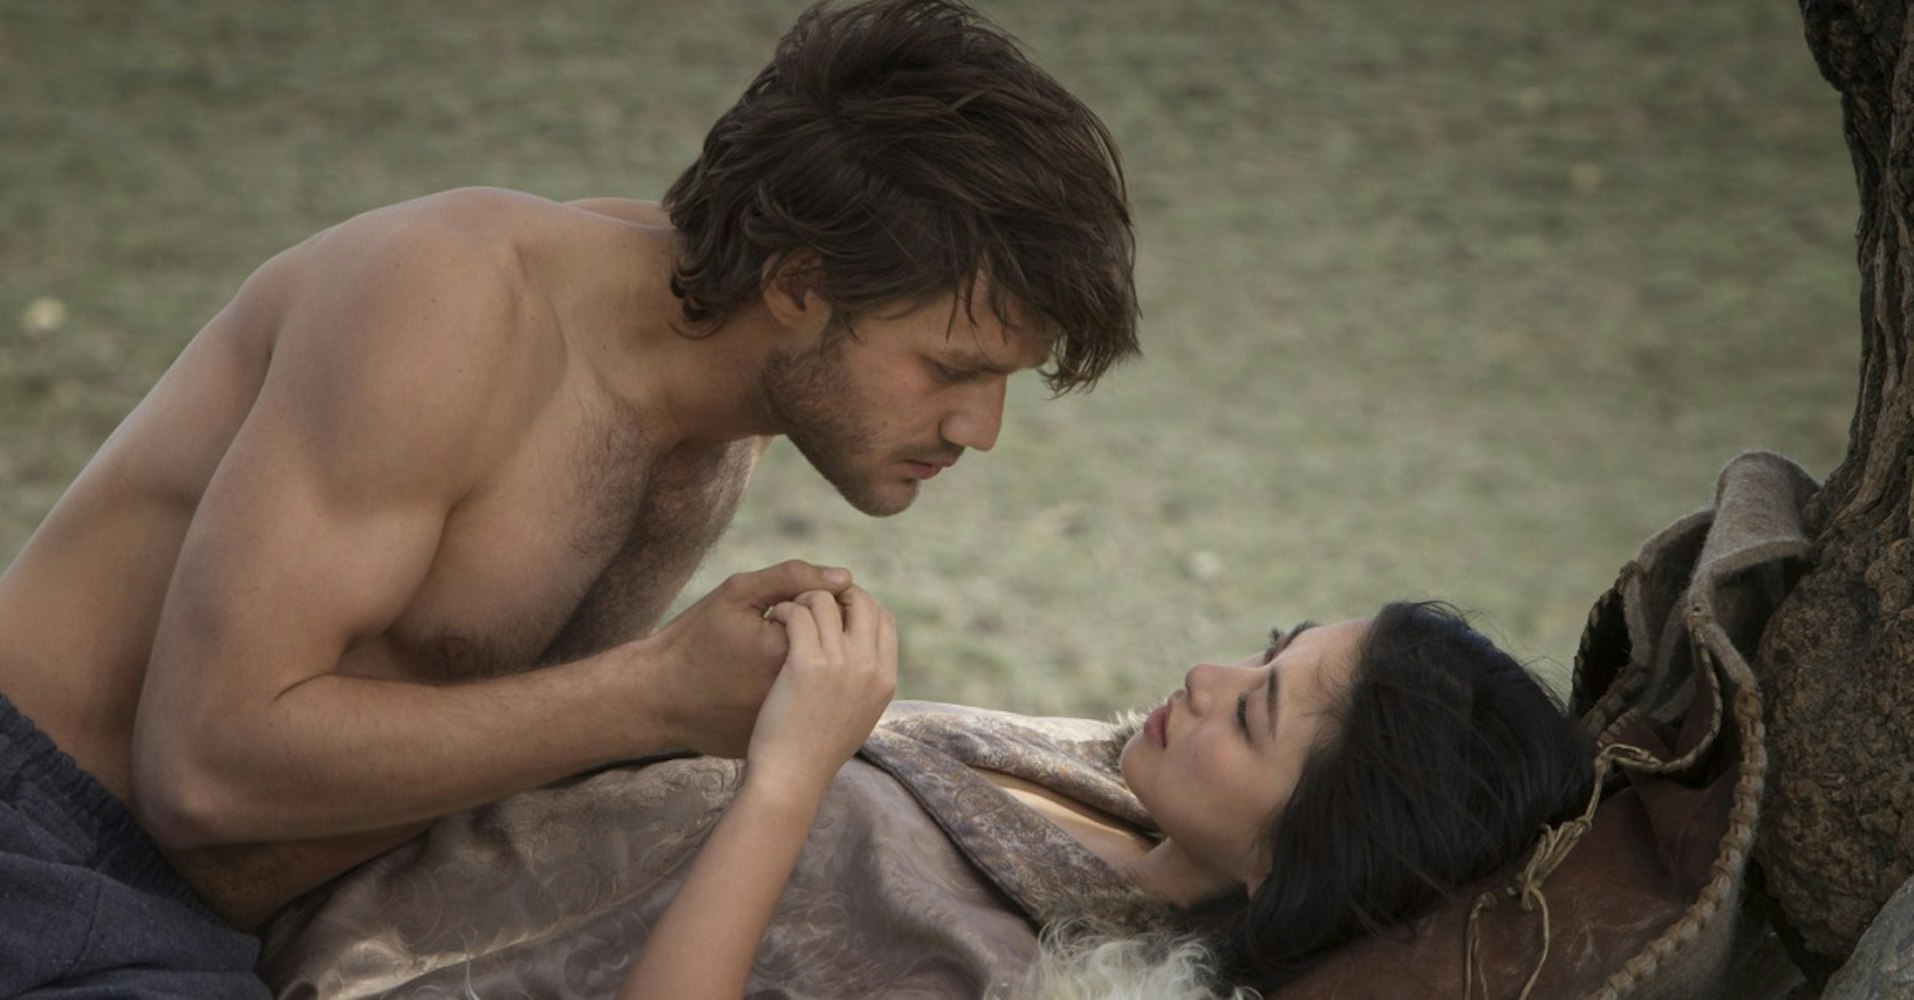 TV Shows with Nudity: Marco Polo